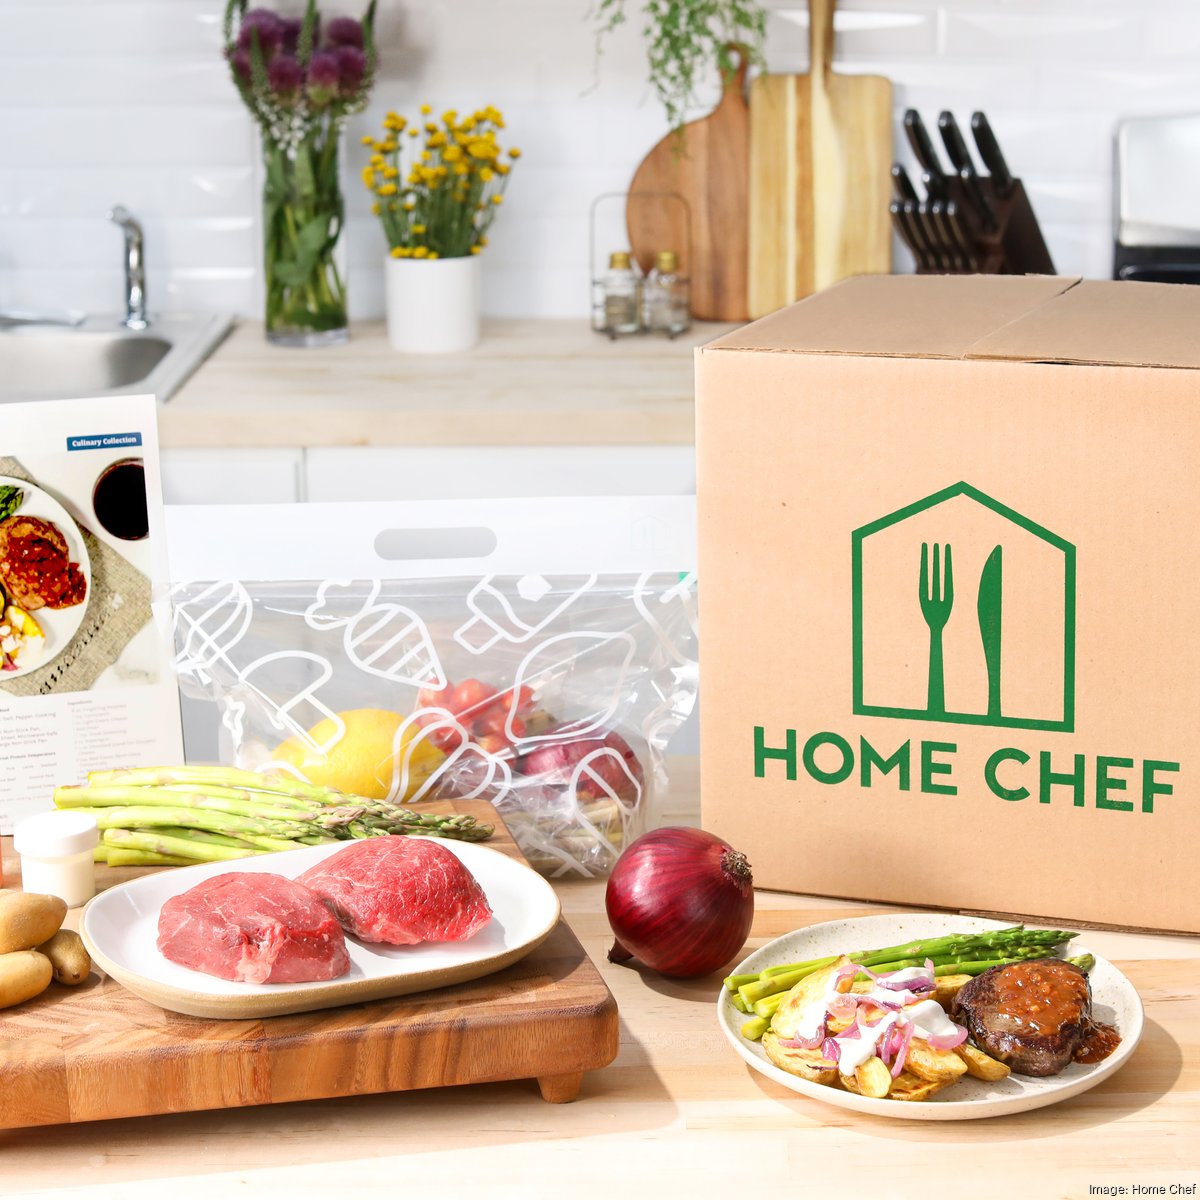 Is Home Meal Delivery the Future? - Culinary Depot